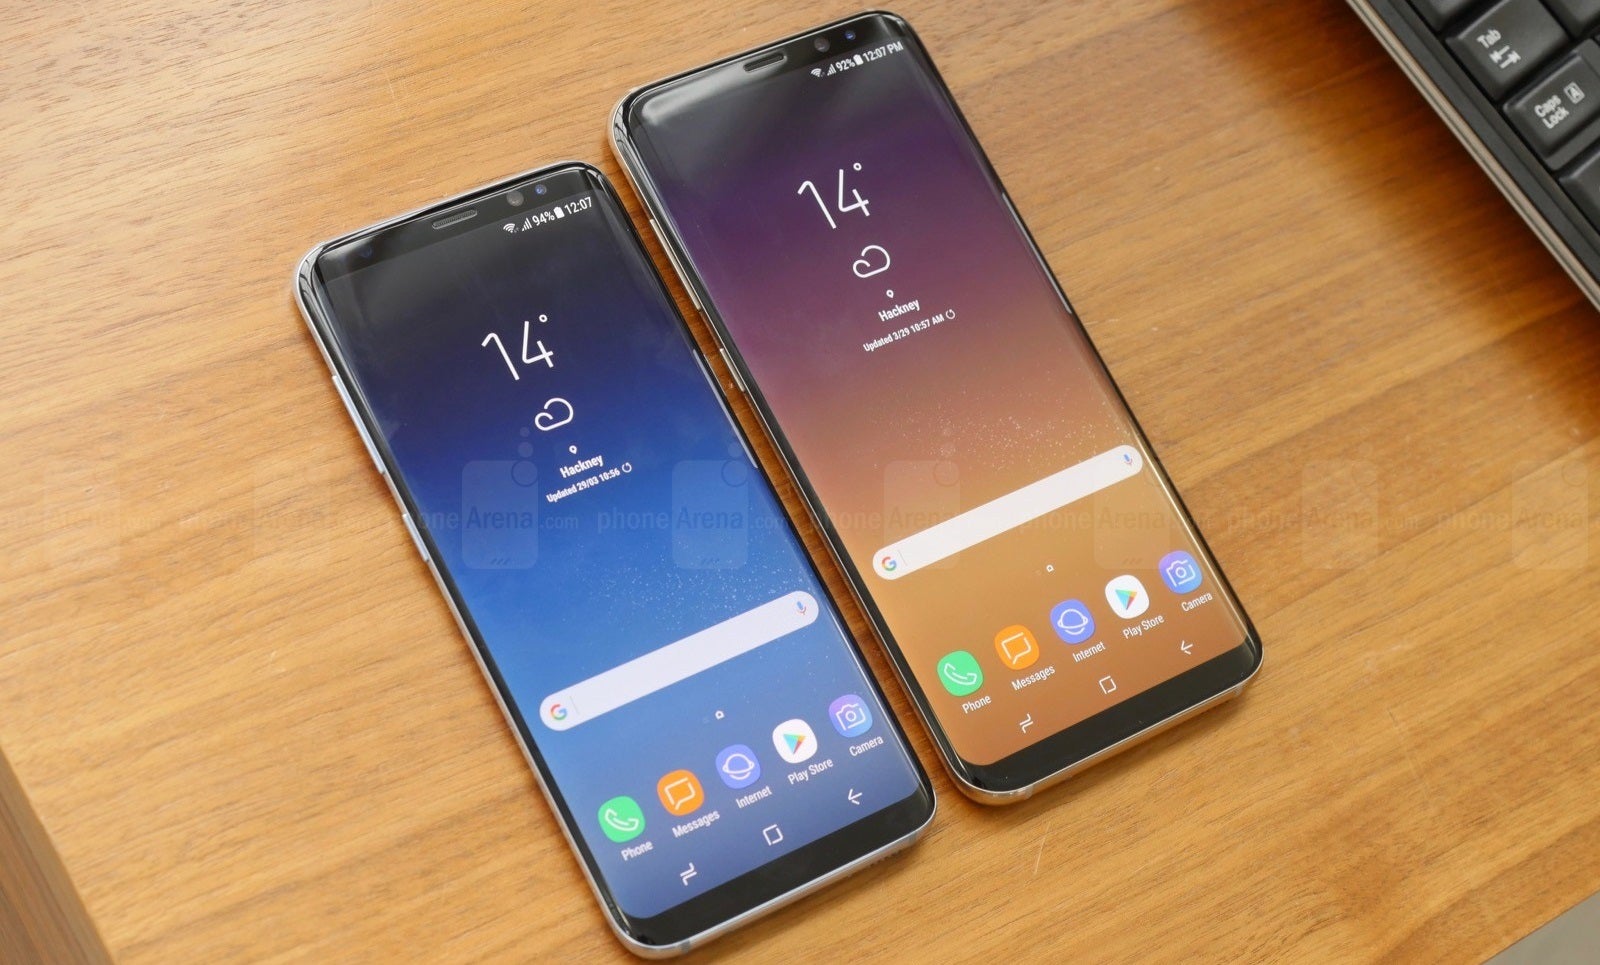 The Samsung Galaxy S8 and S8+ - Reminder: the Galaxy S8 shipping date is April 18, exactly one week from now